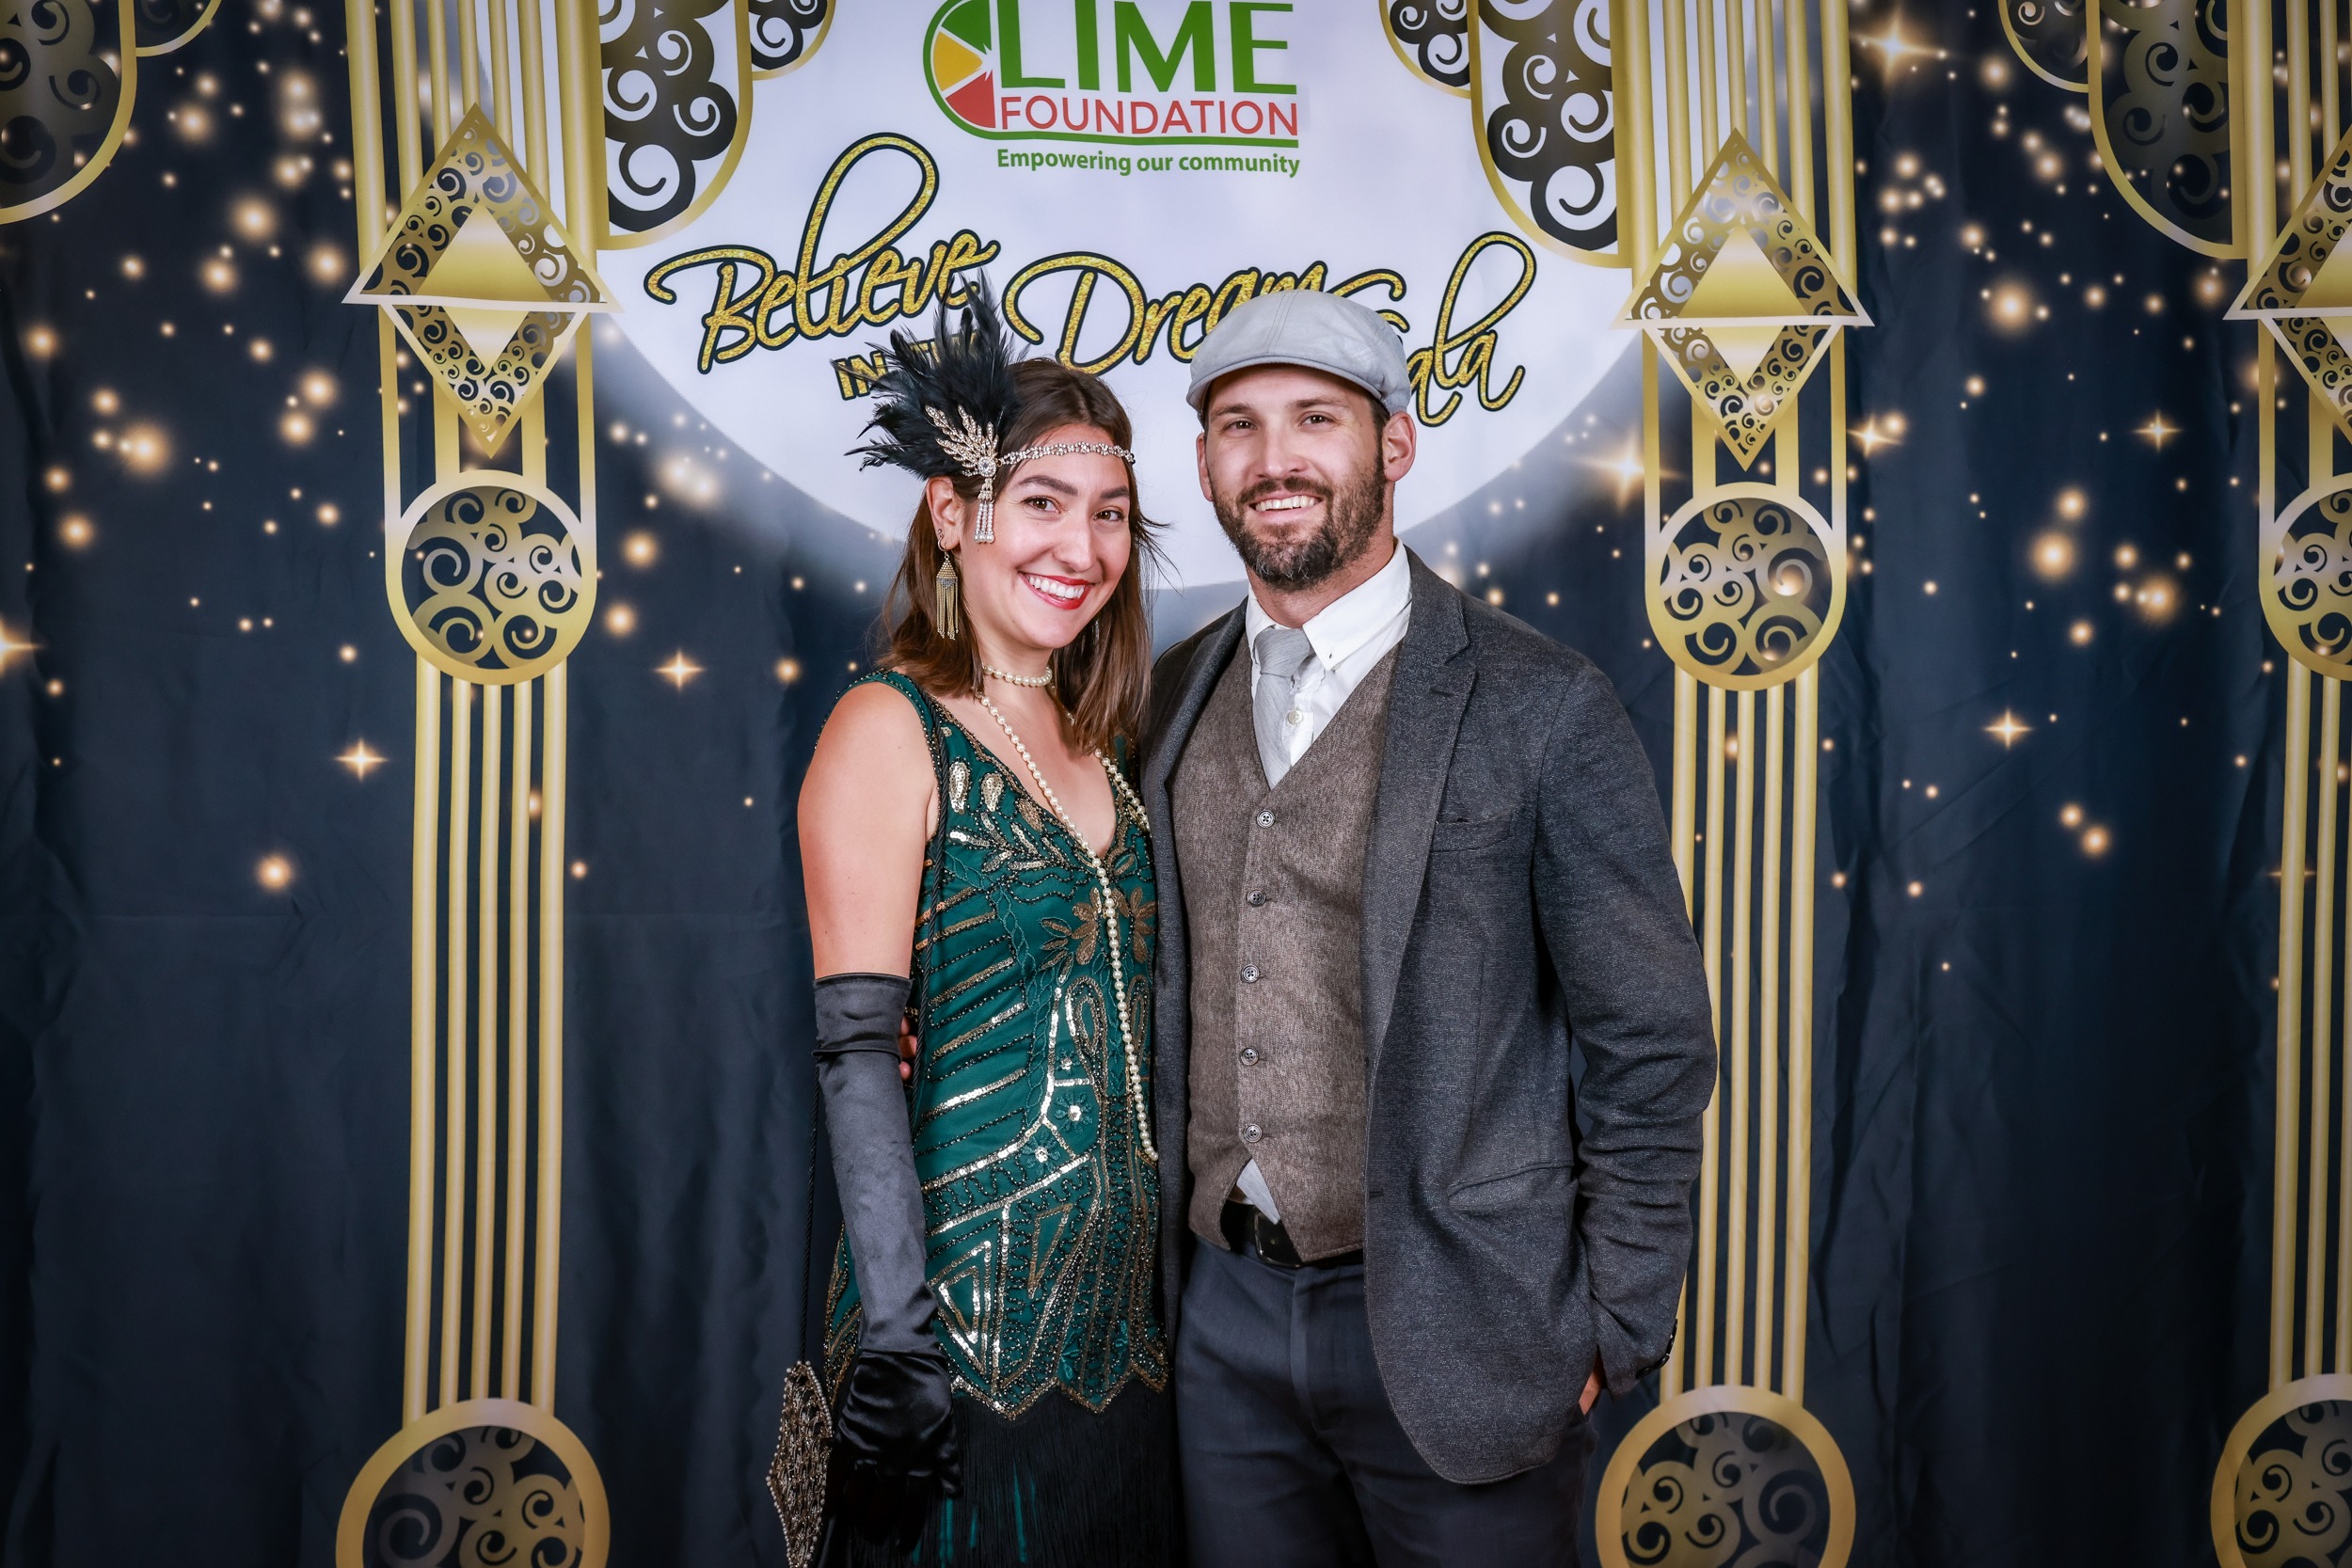 A man and woman pose for a photo at a 1920's themed party hosted by The LIME Foundation of Santa Rosa.